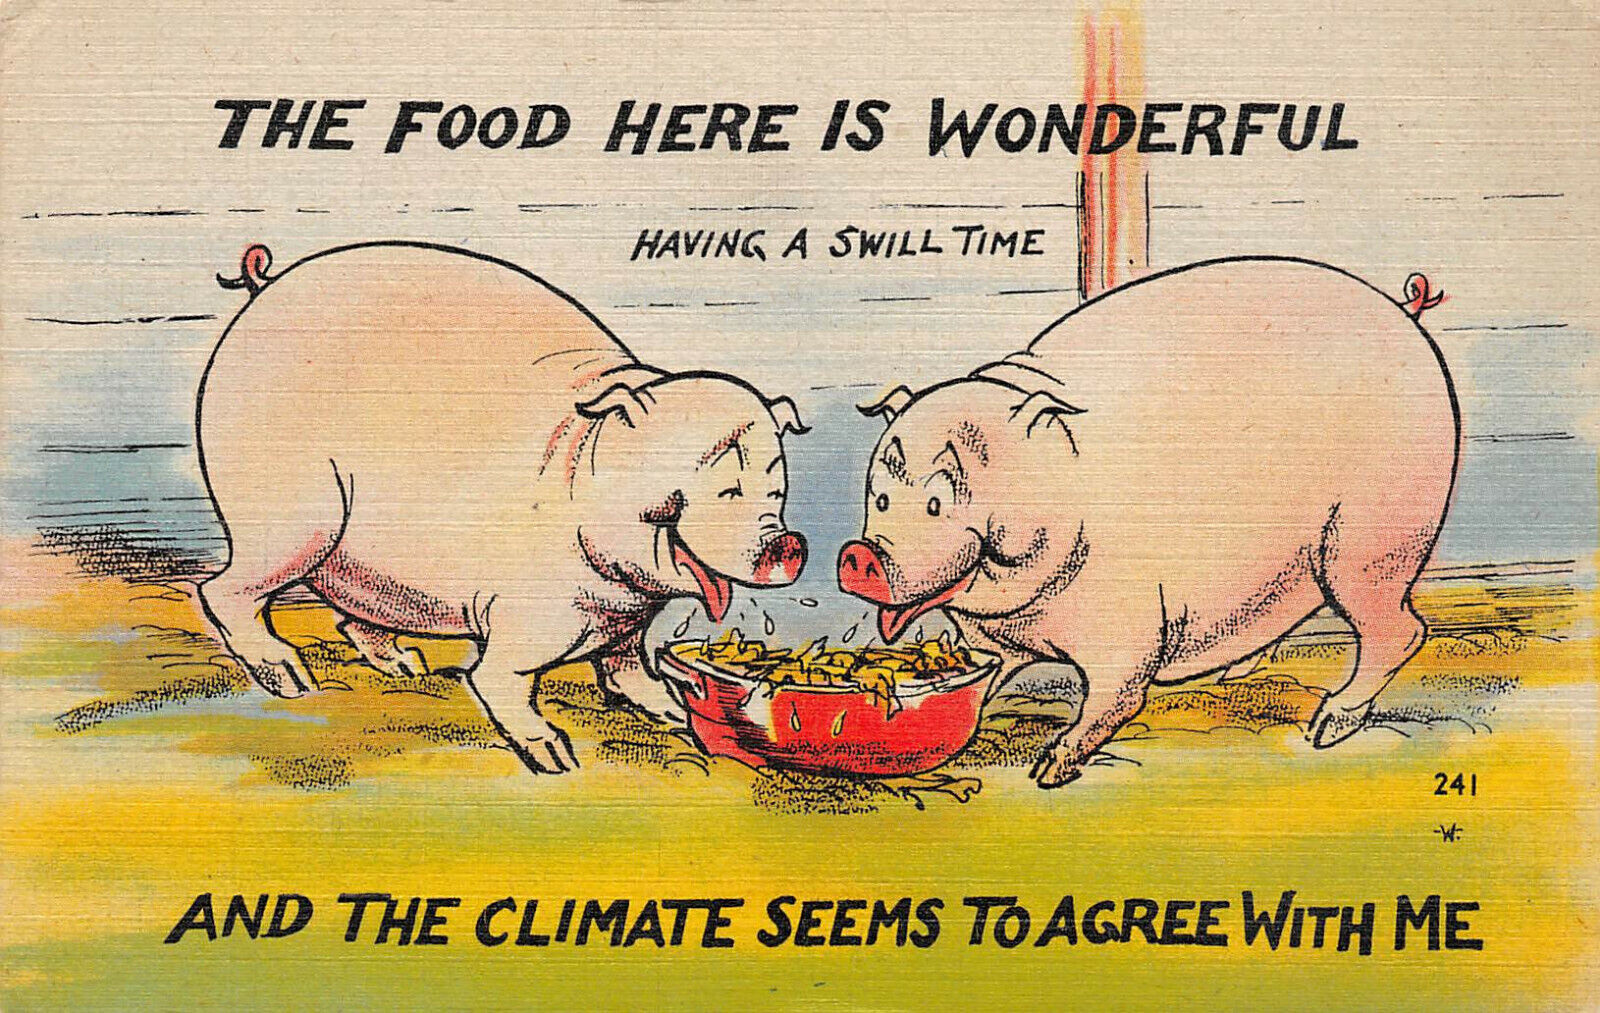 UPICK Postcard Comic The Food Here Is Wonderful Having A Swill Time 1946 Linen 